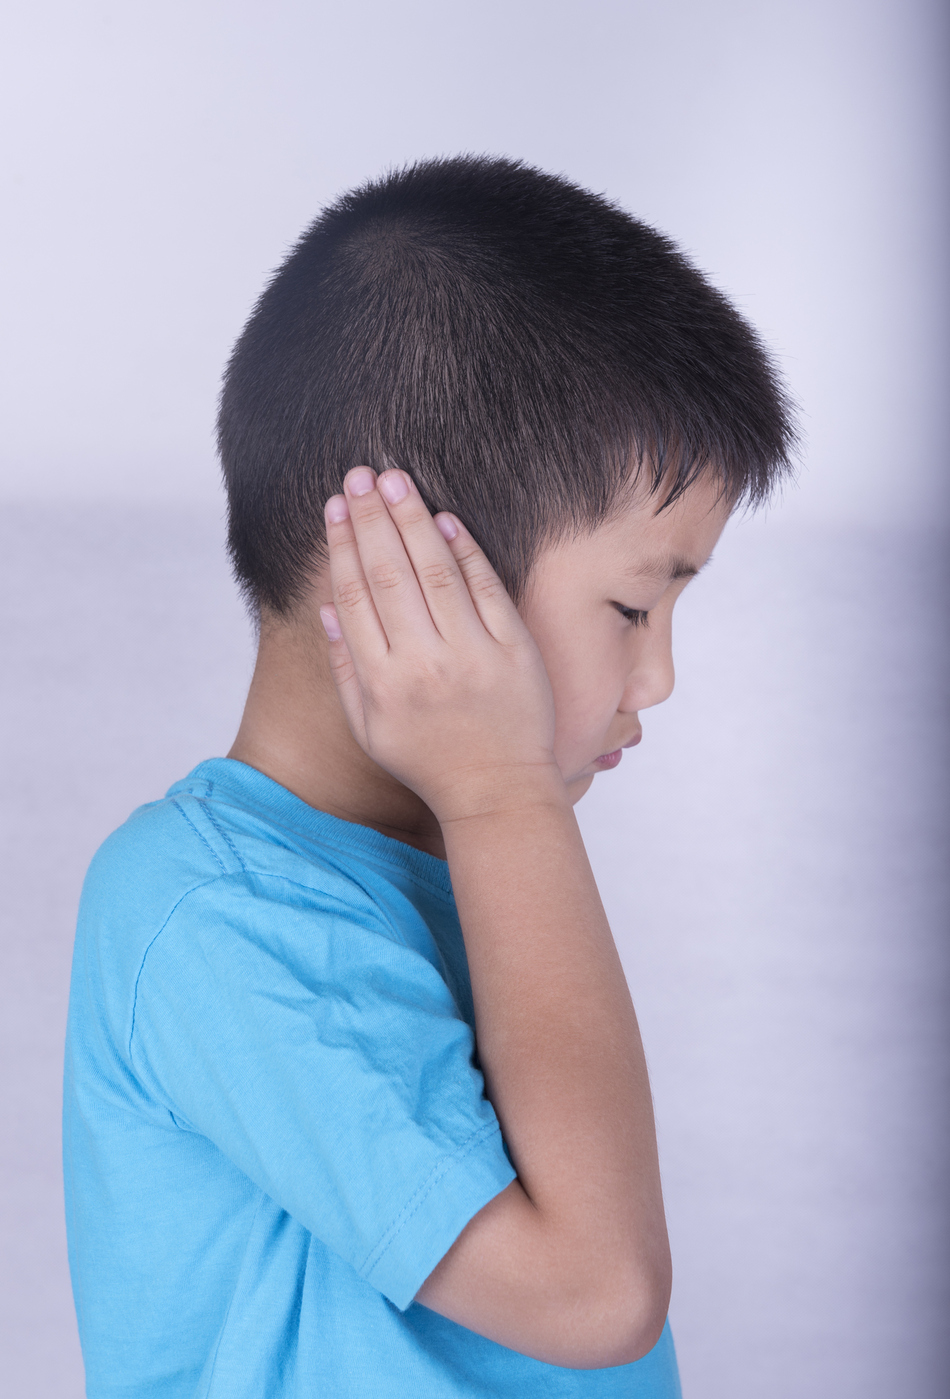 Could Your Child’s Ear Injury Be Something More Serious?